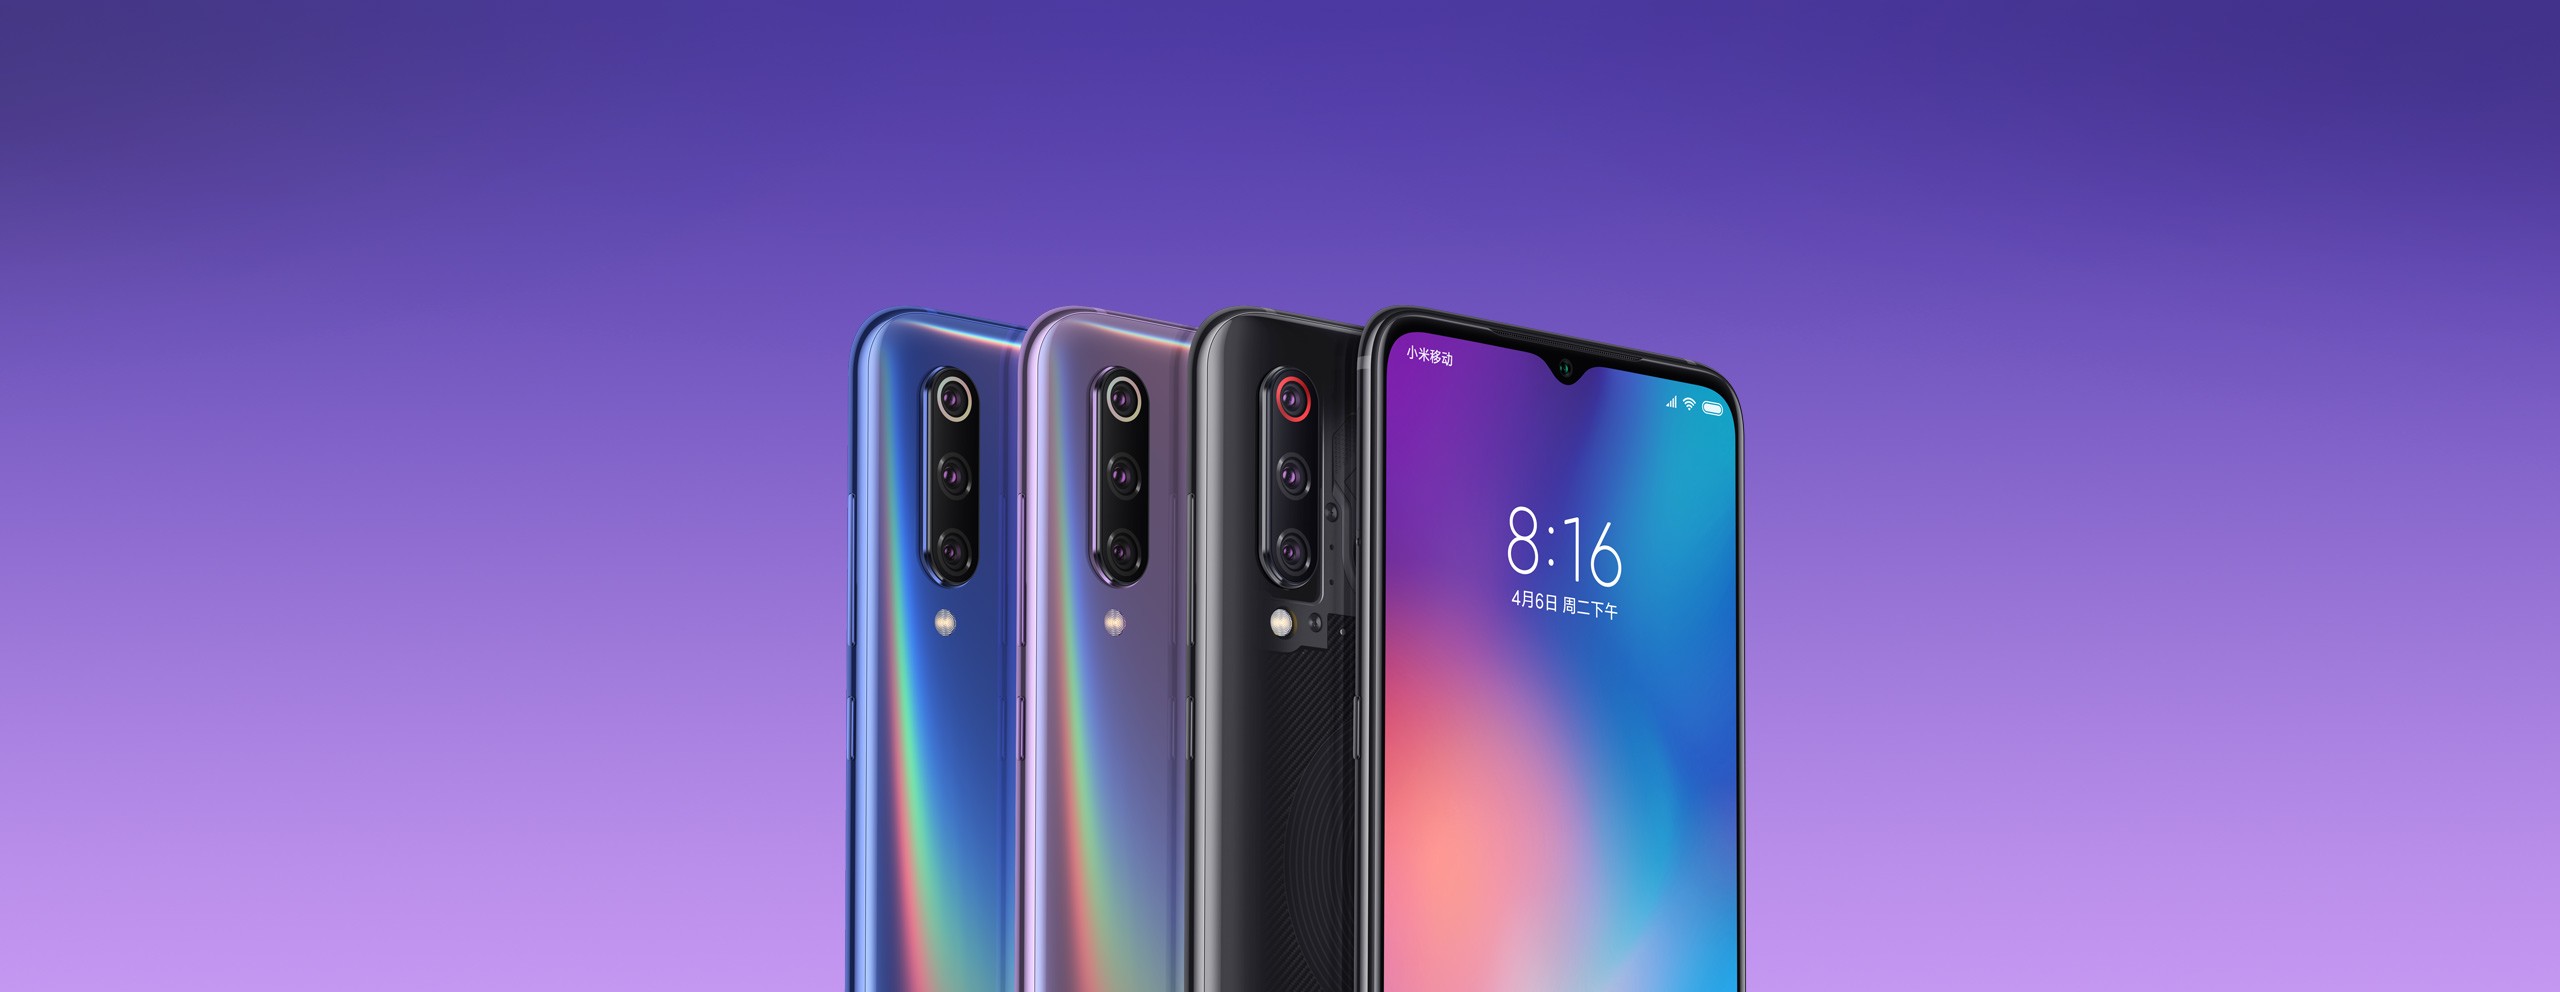 Xiaomi Mi 9 announced Was faster in more ways than other under $500